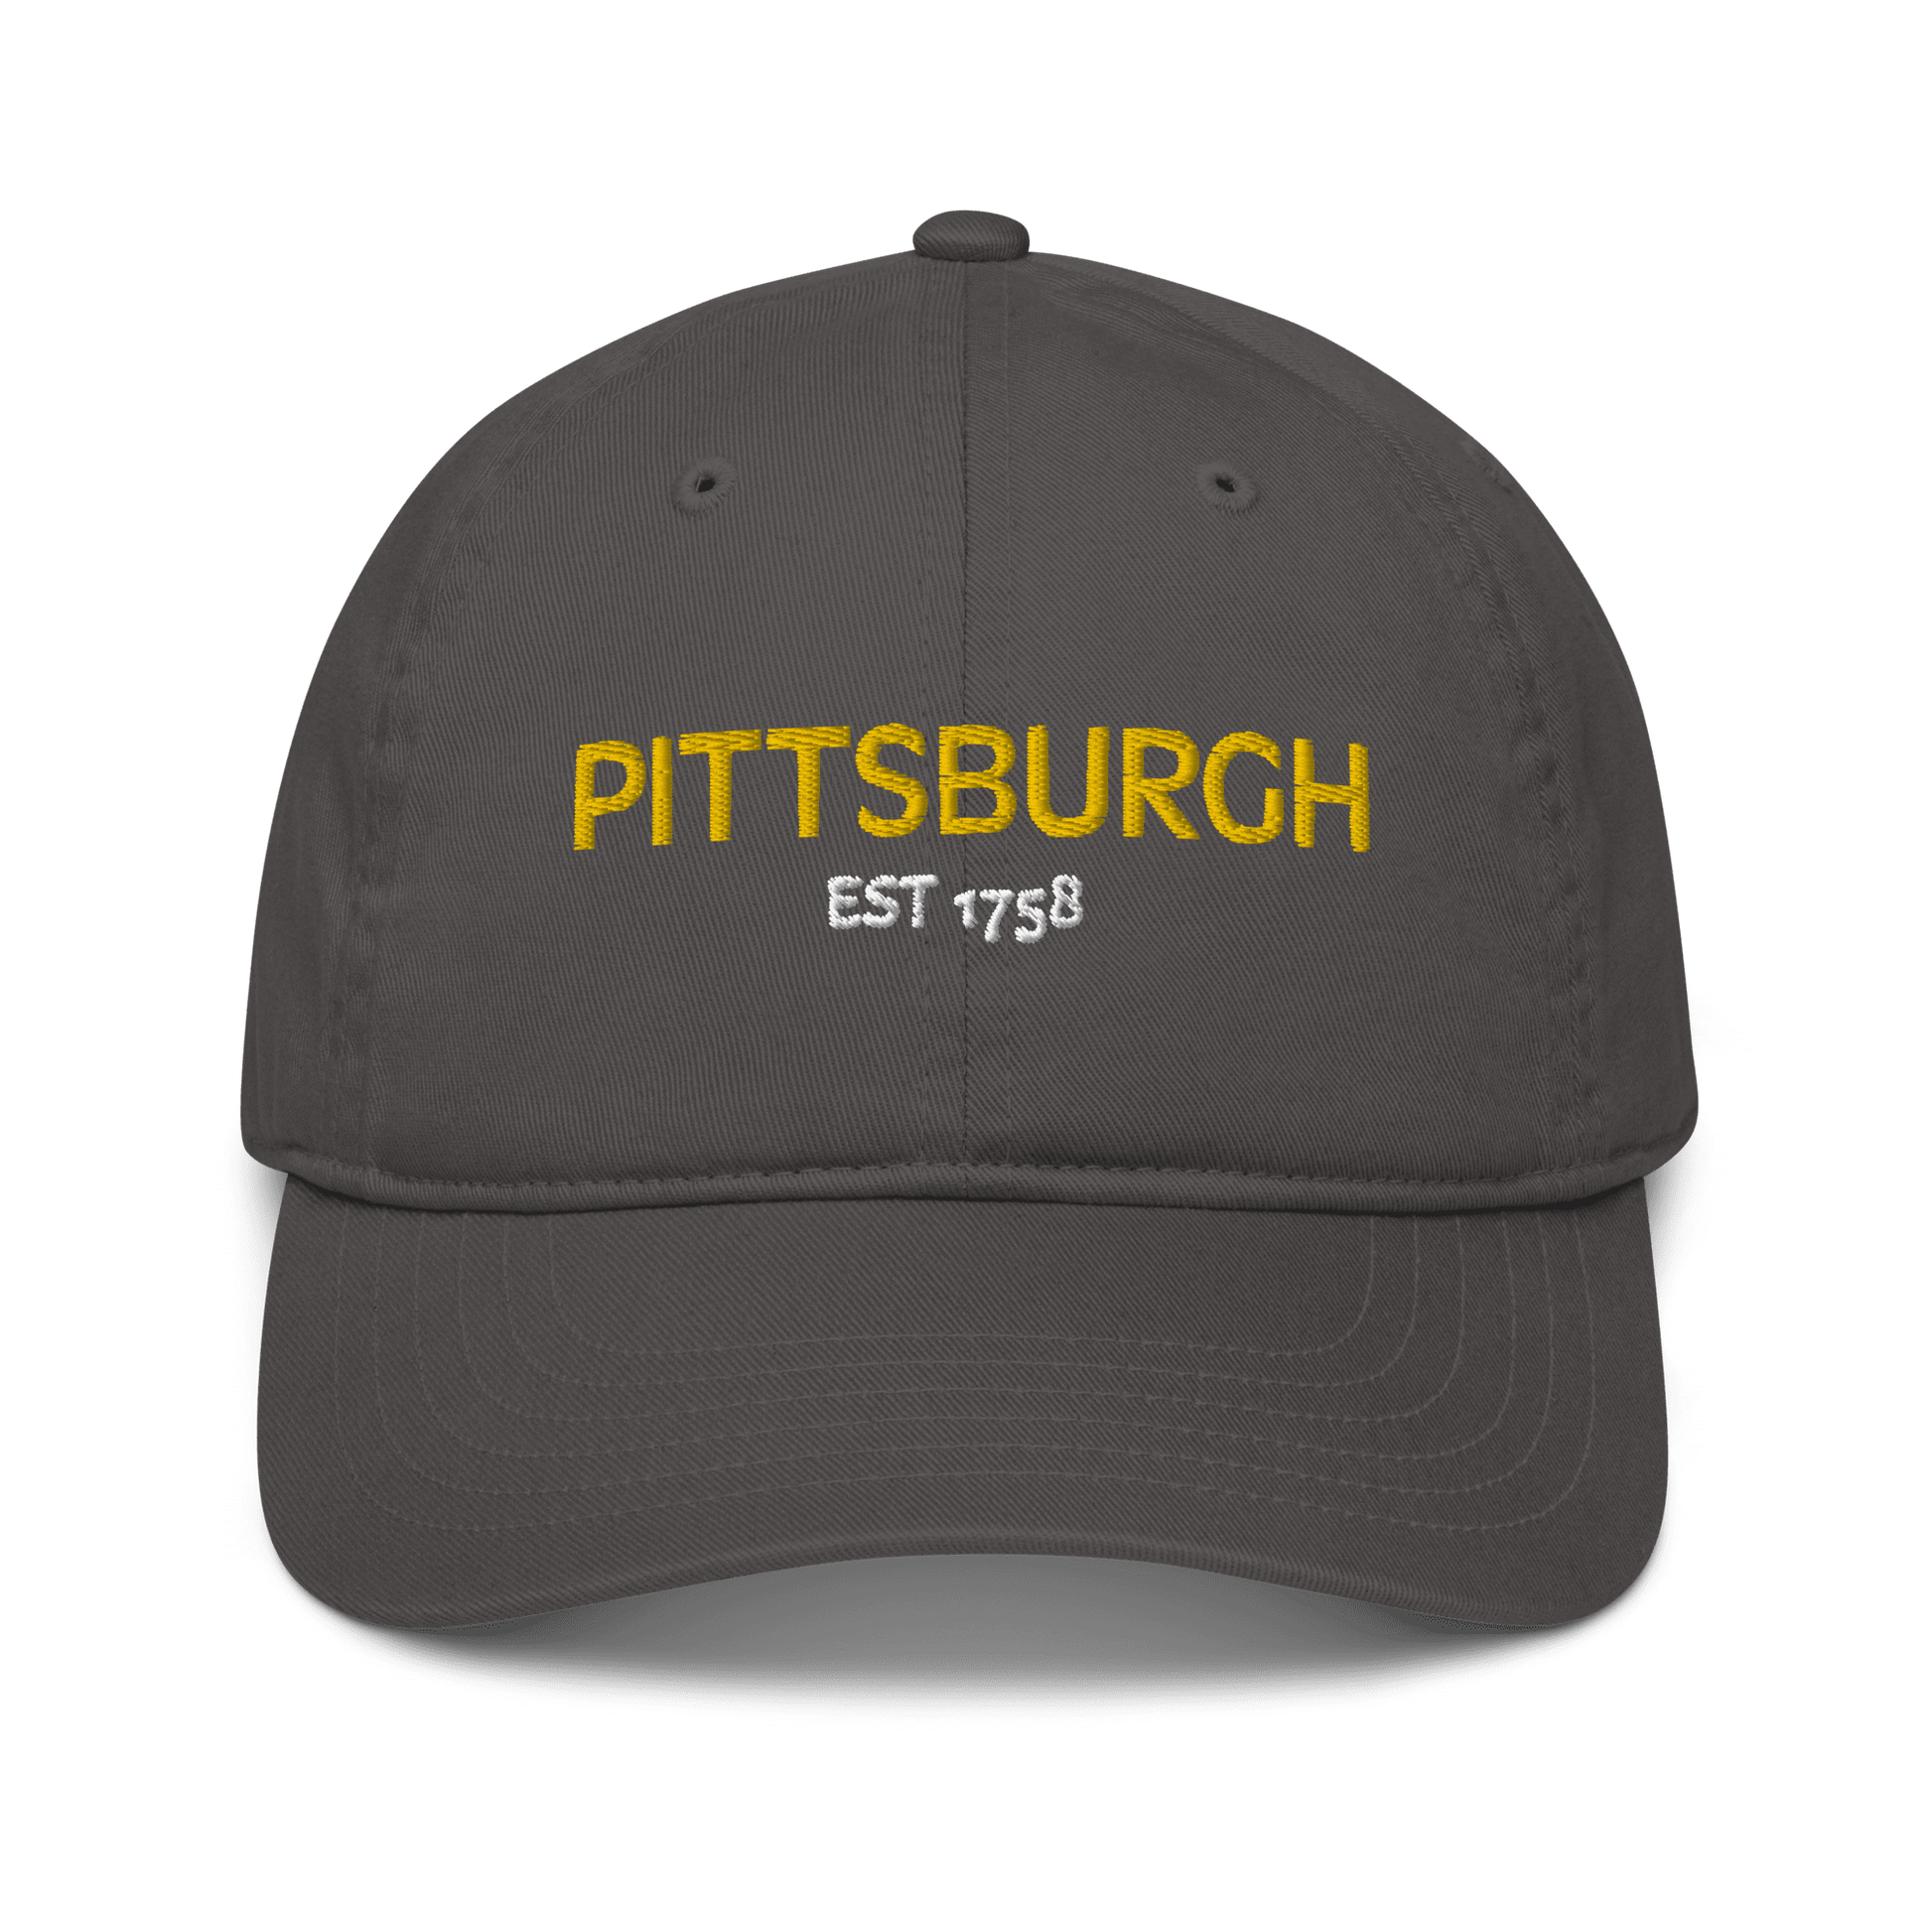 Pittsburgh Est 1758 Embroidered Baseball Hat Yinzergear Charcoal 